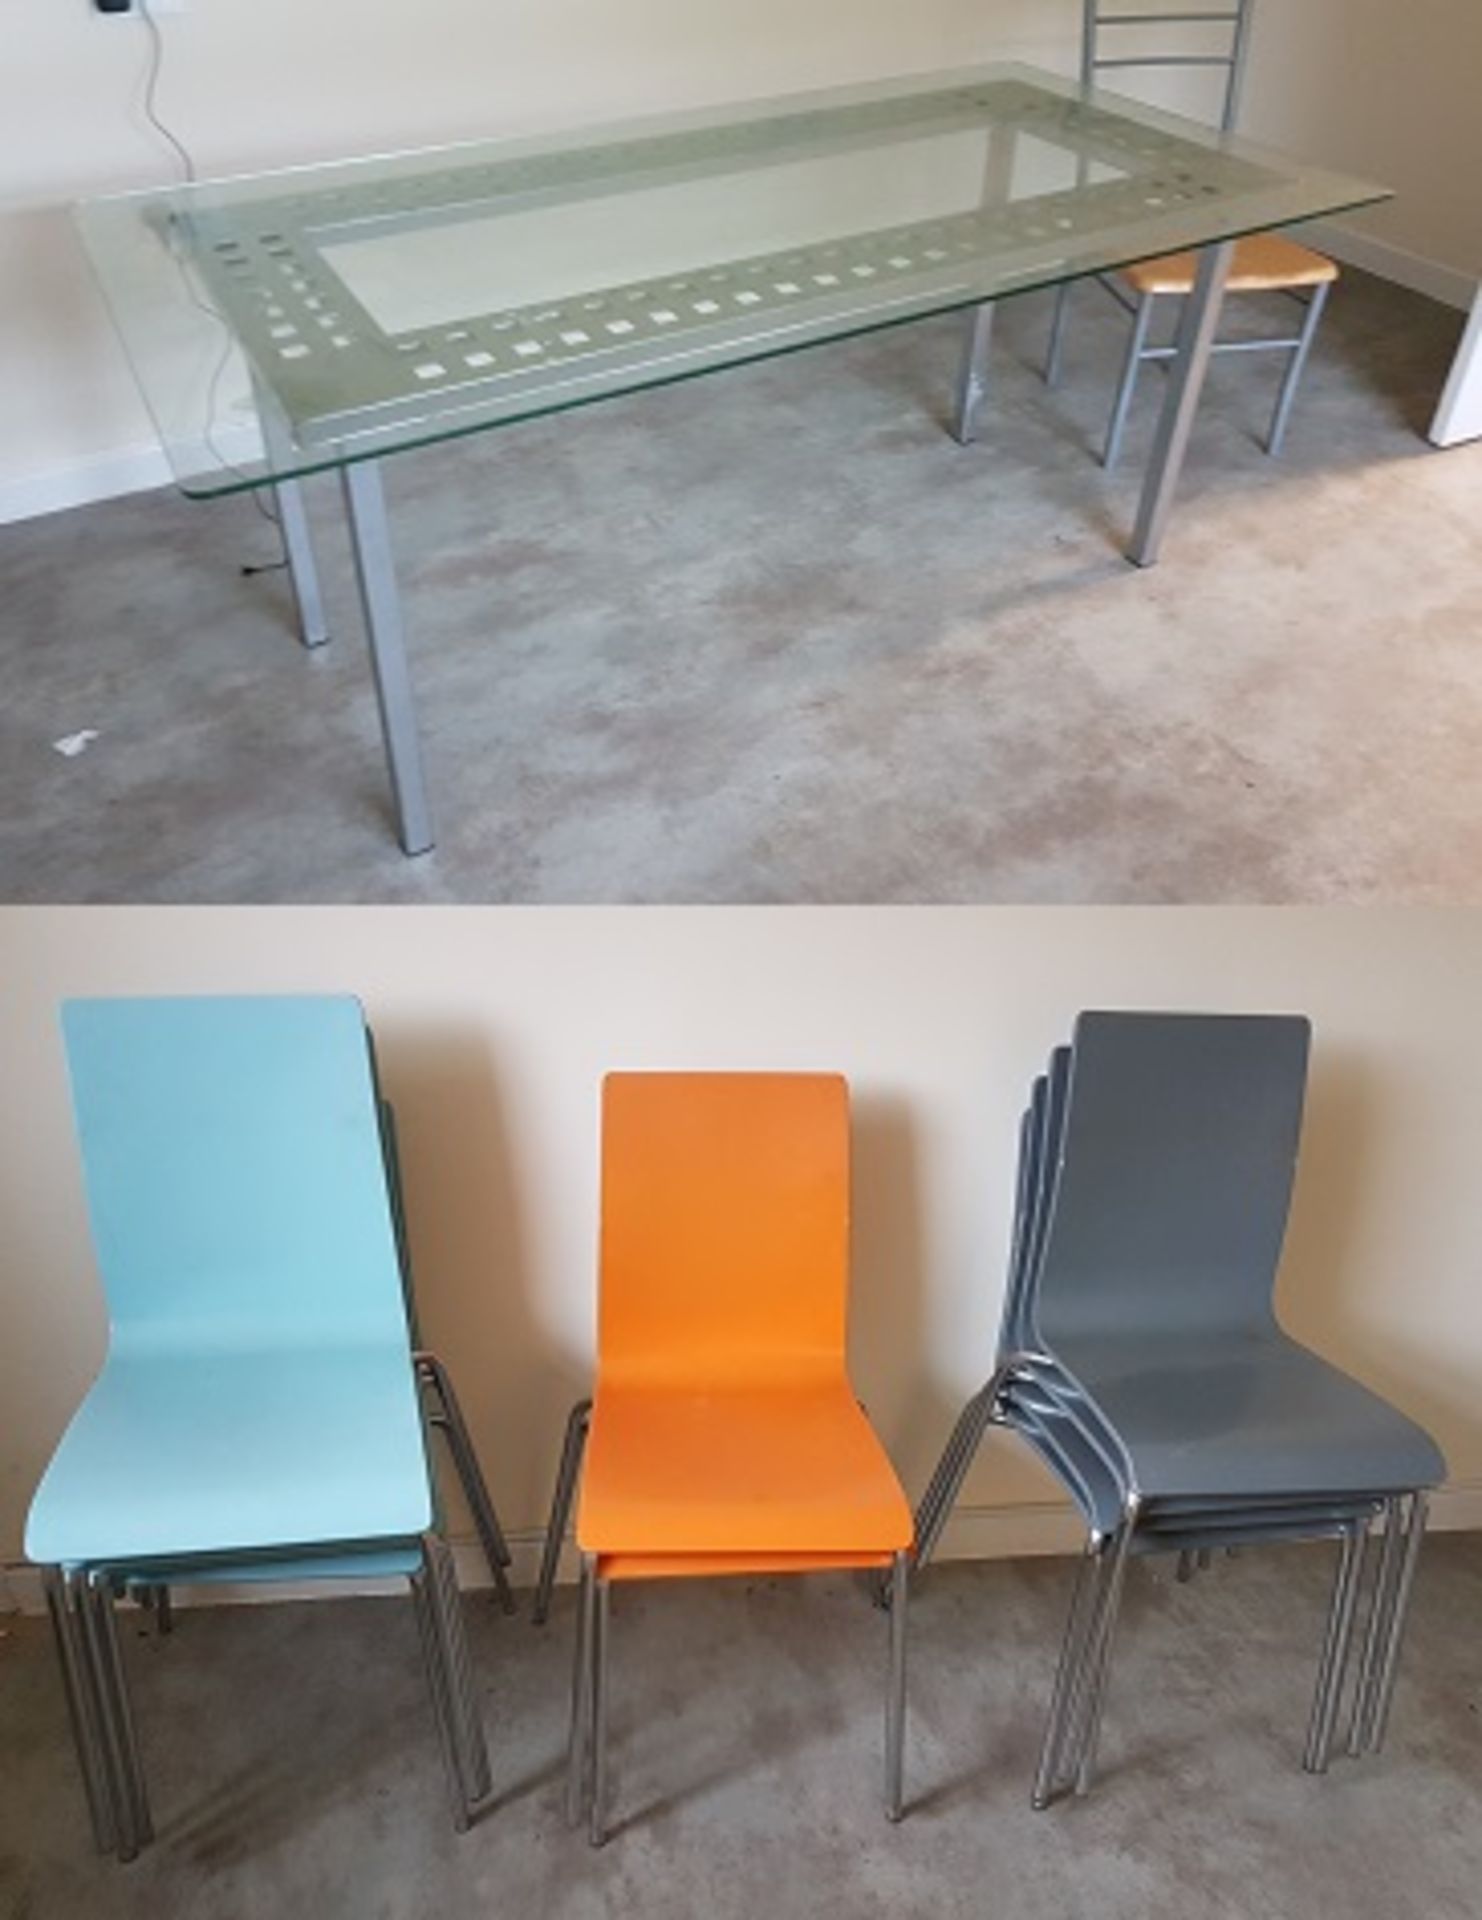 1 x Glass Dining Table With Ten Chairs in Orange Blue and Grey - CL303 - Location: North Wales LL14